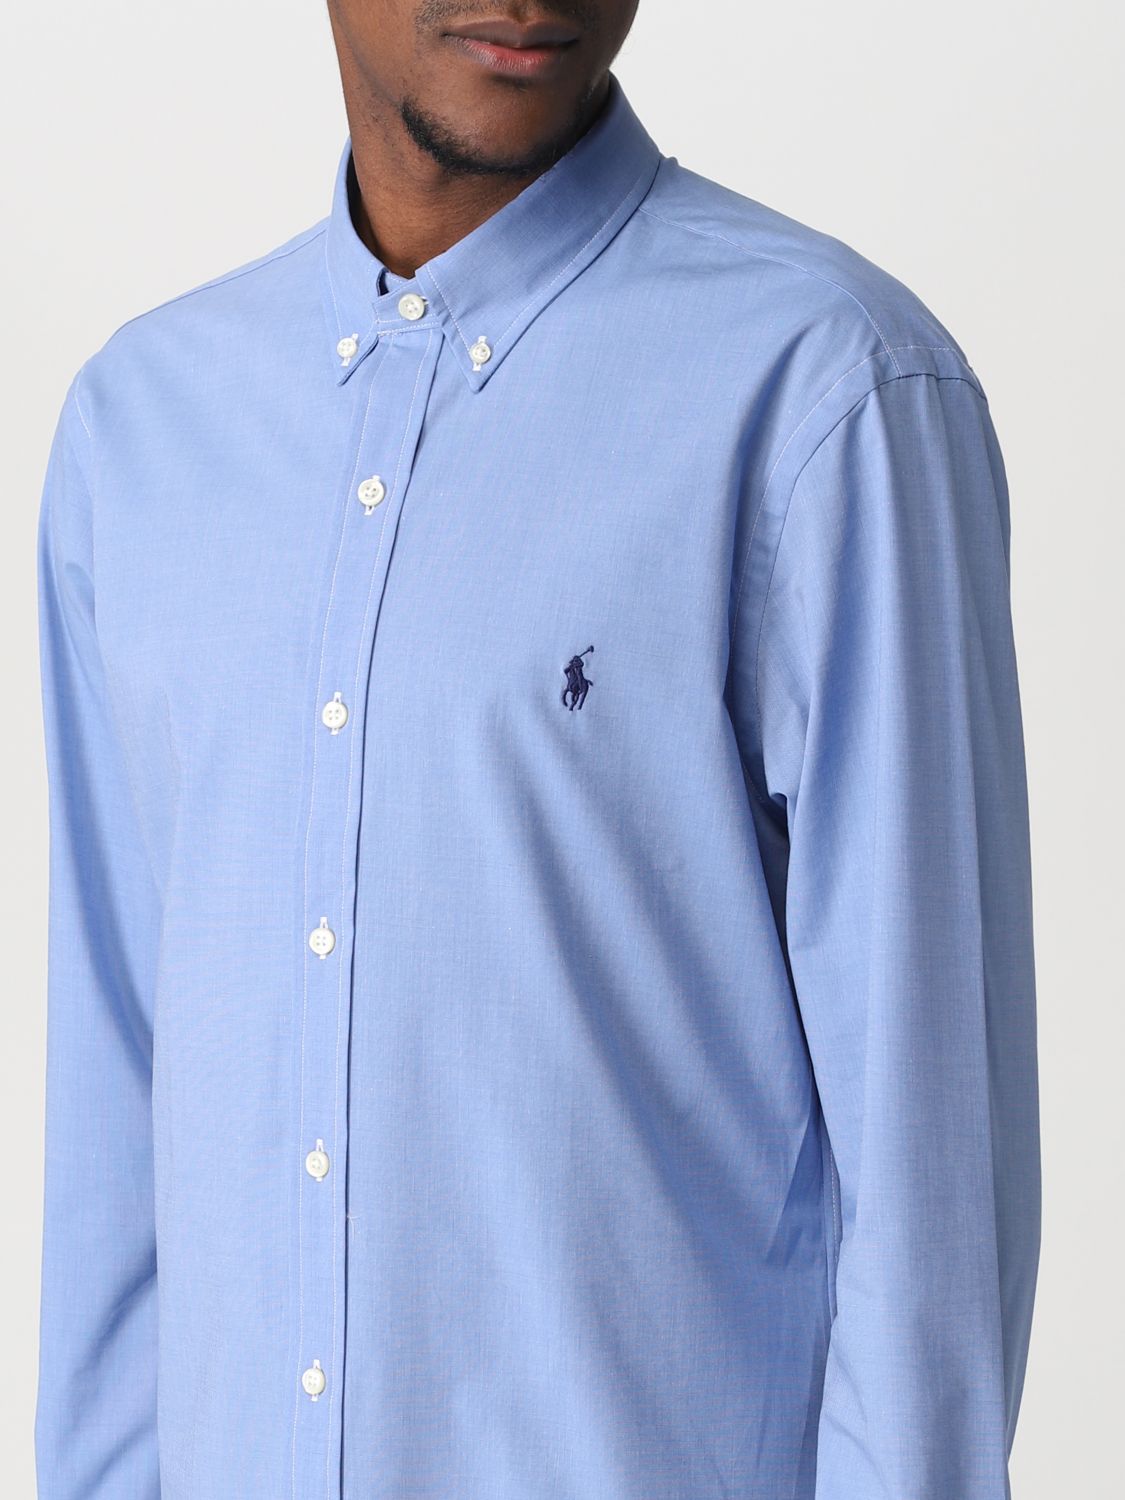 Polo Ralph Lauren Outlet: basic shirt with embroidered logo 1 | Polo Ralph Lauren shirt 710832480 online on GIGLIO.COM